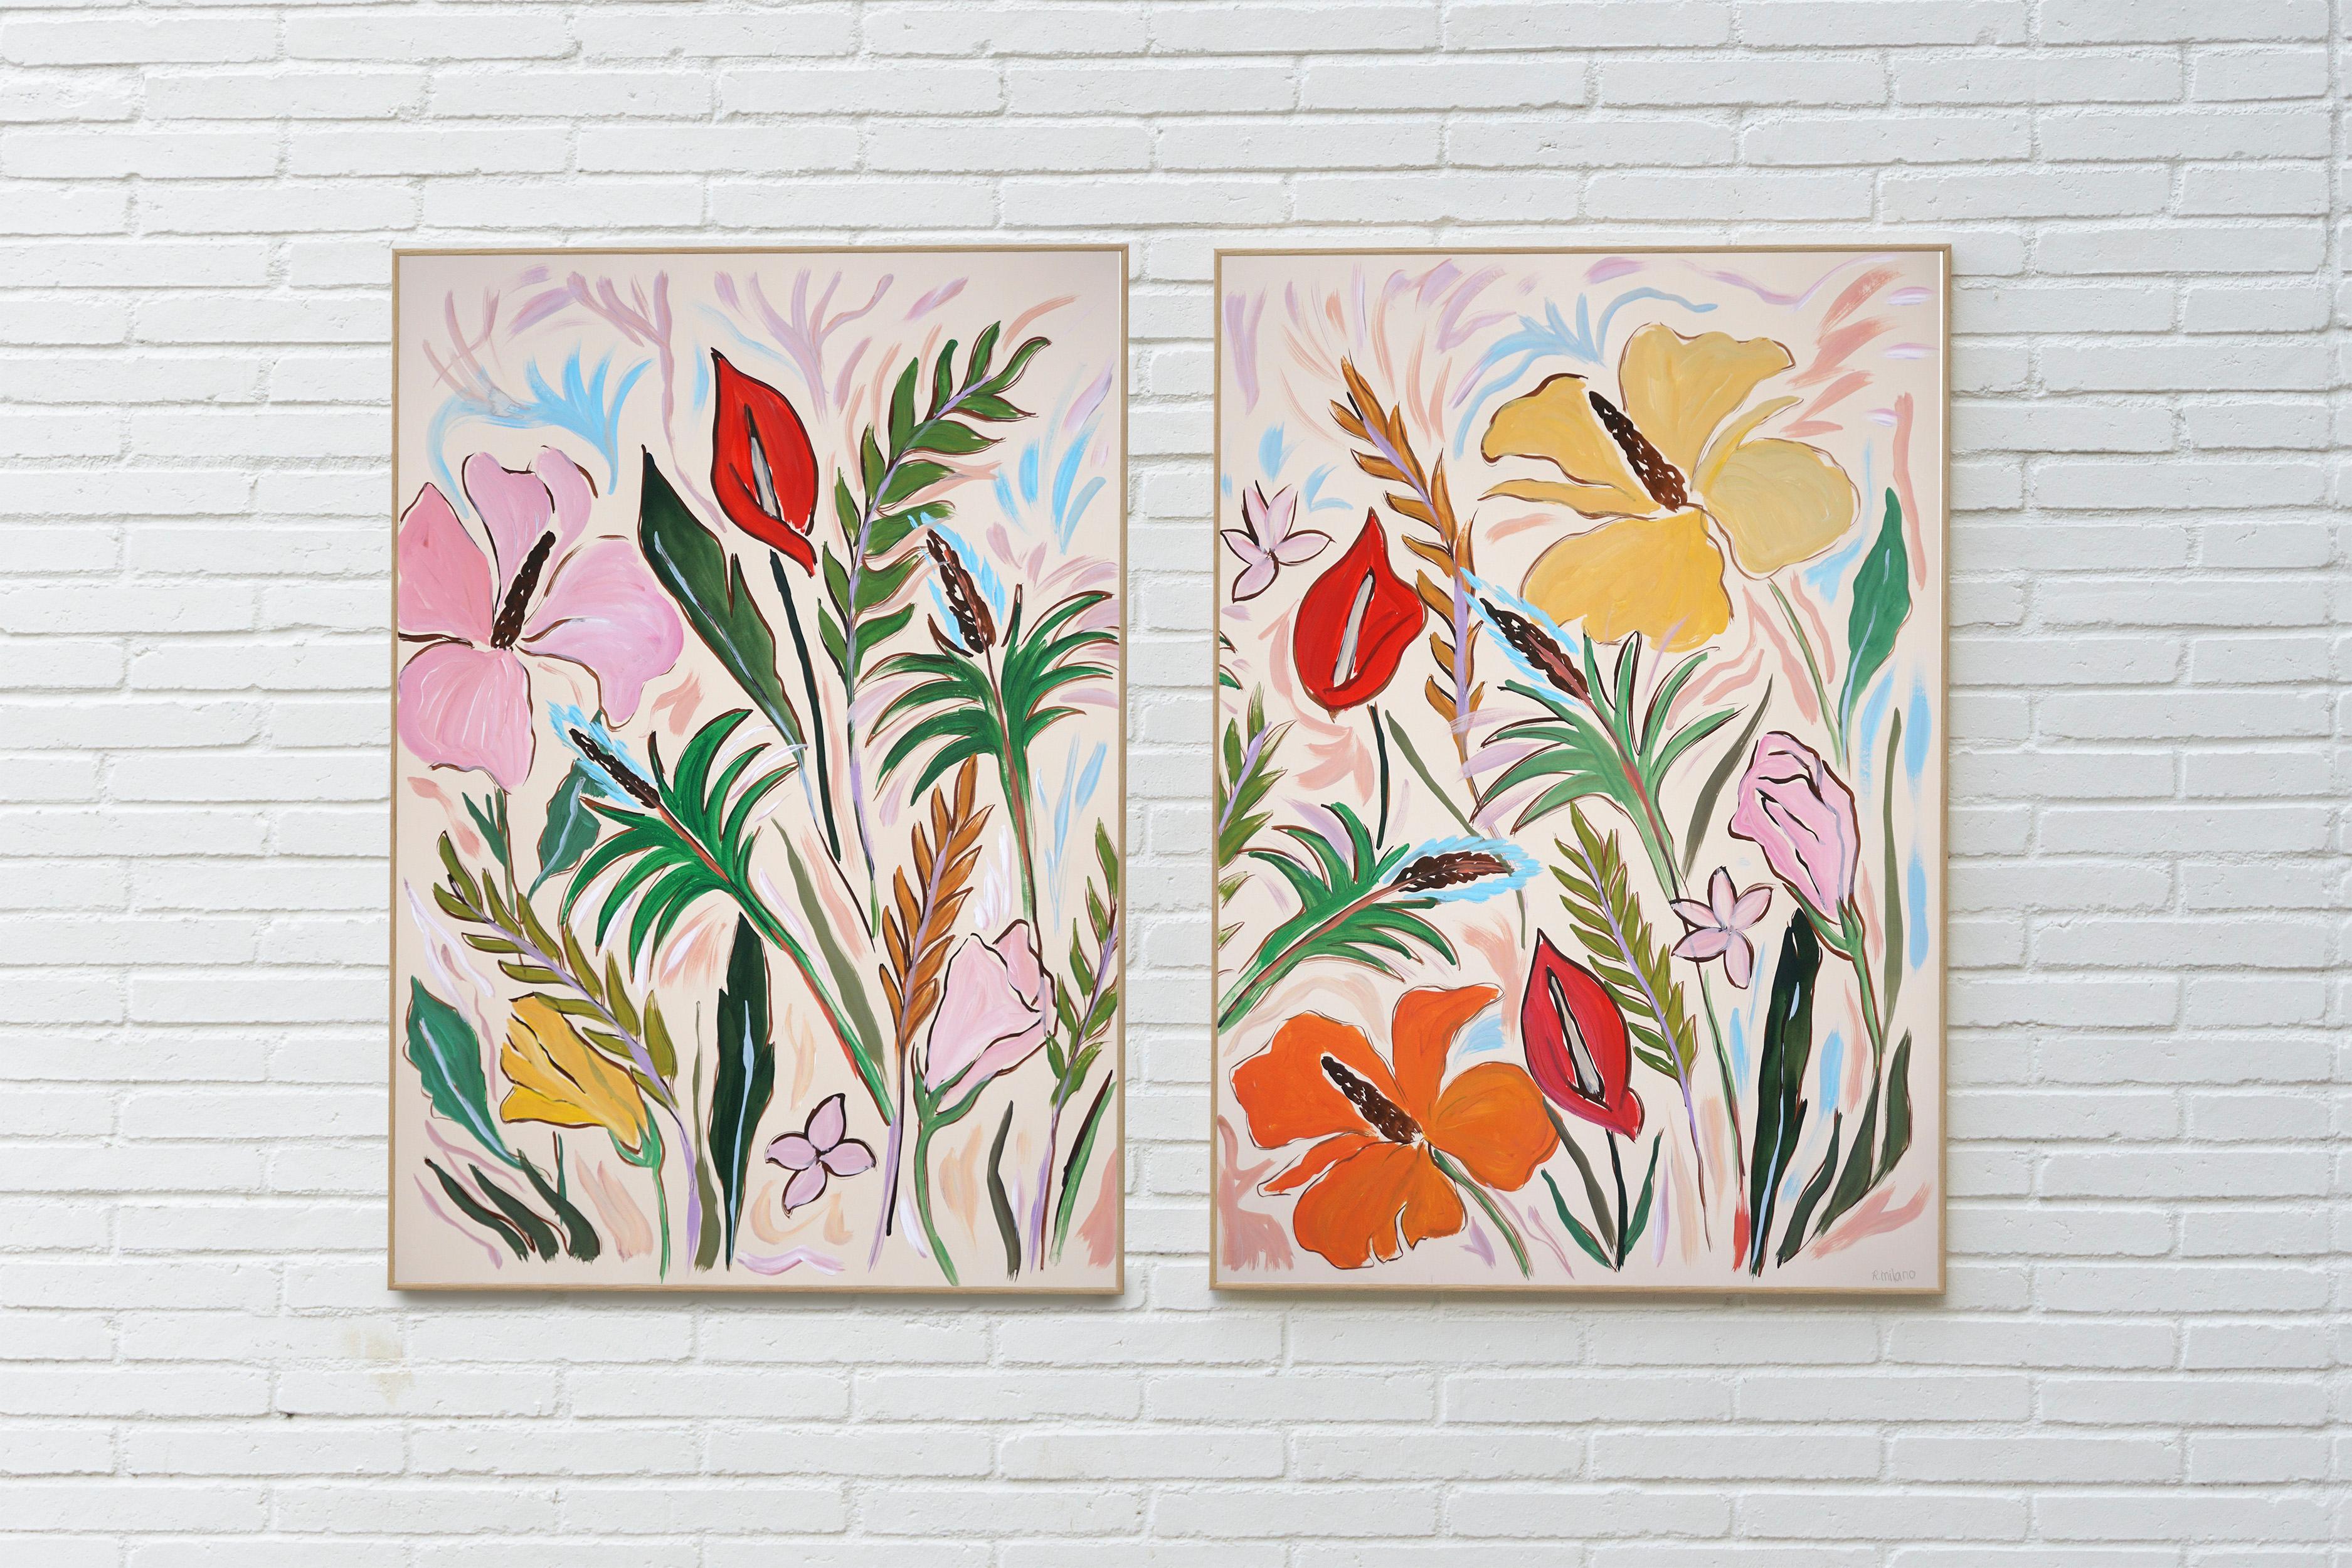 Tropical Wild Hibiscus Bloom Diptych, Flamingo Flowers Green Leaves Illustration - Painting by Romina Milano